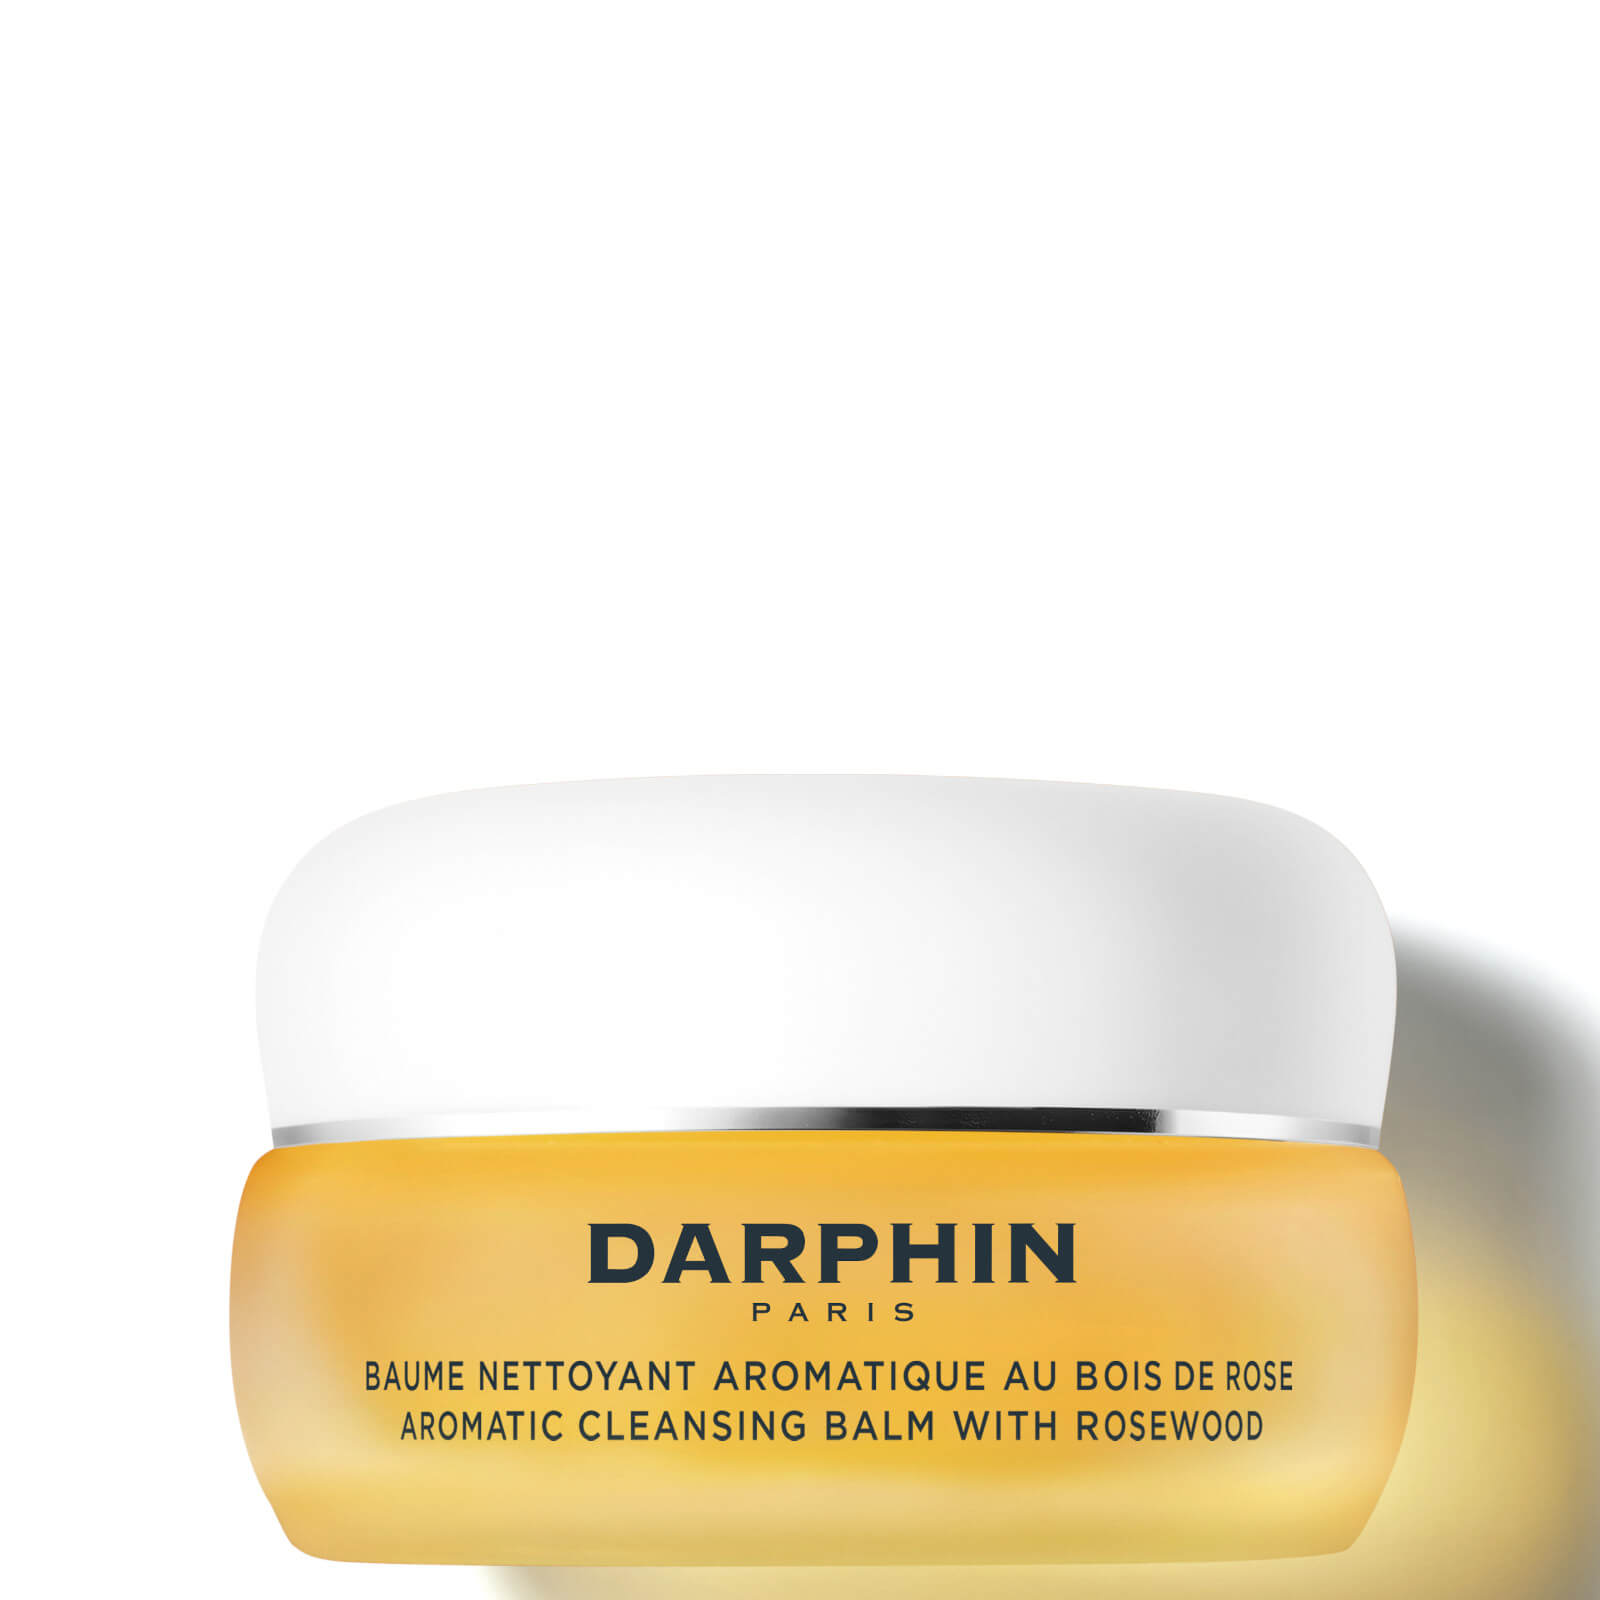 Darphin Aromatic Cleansing Balm with Rosewood 25ml